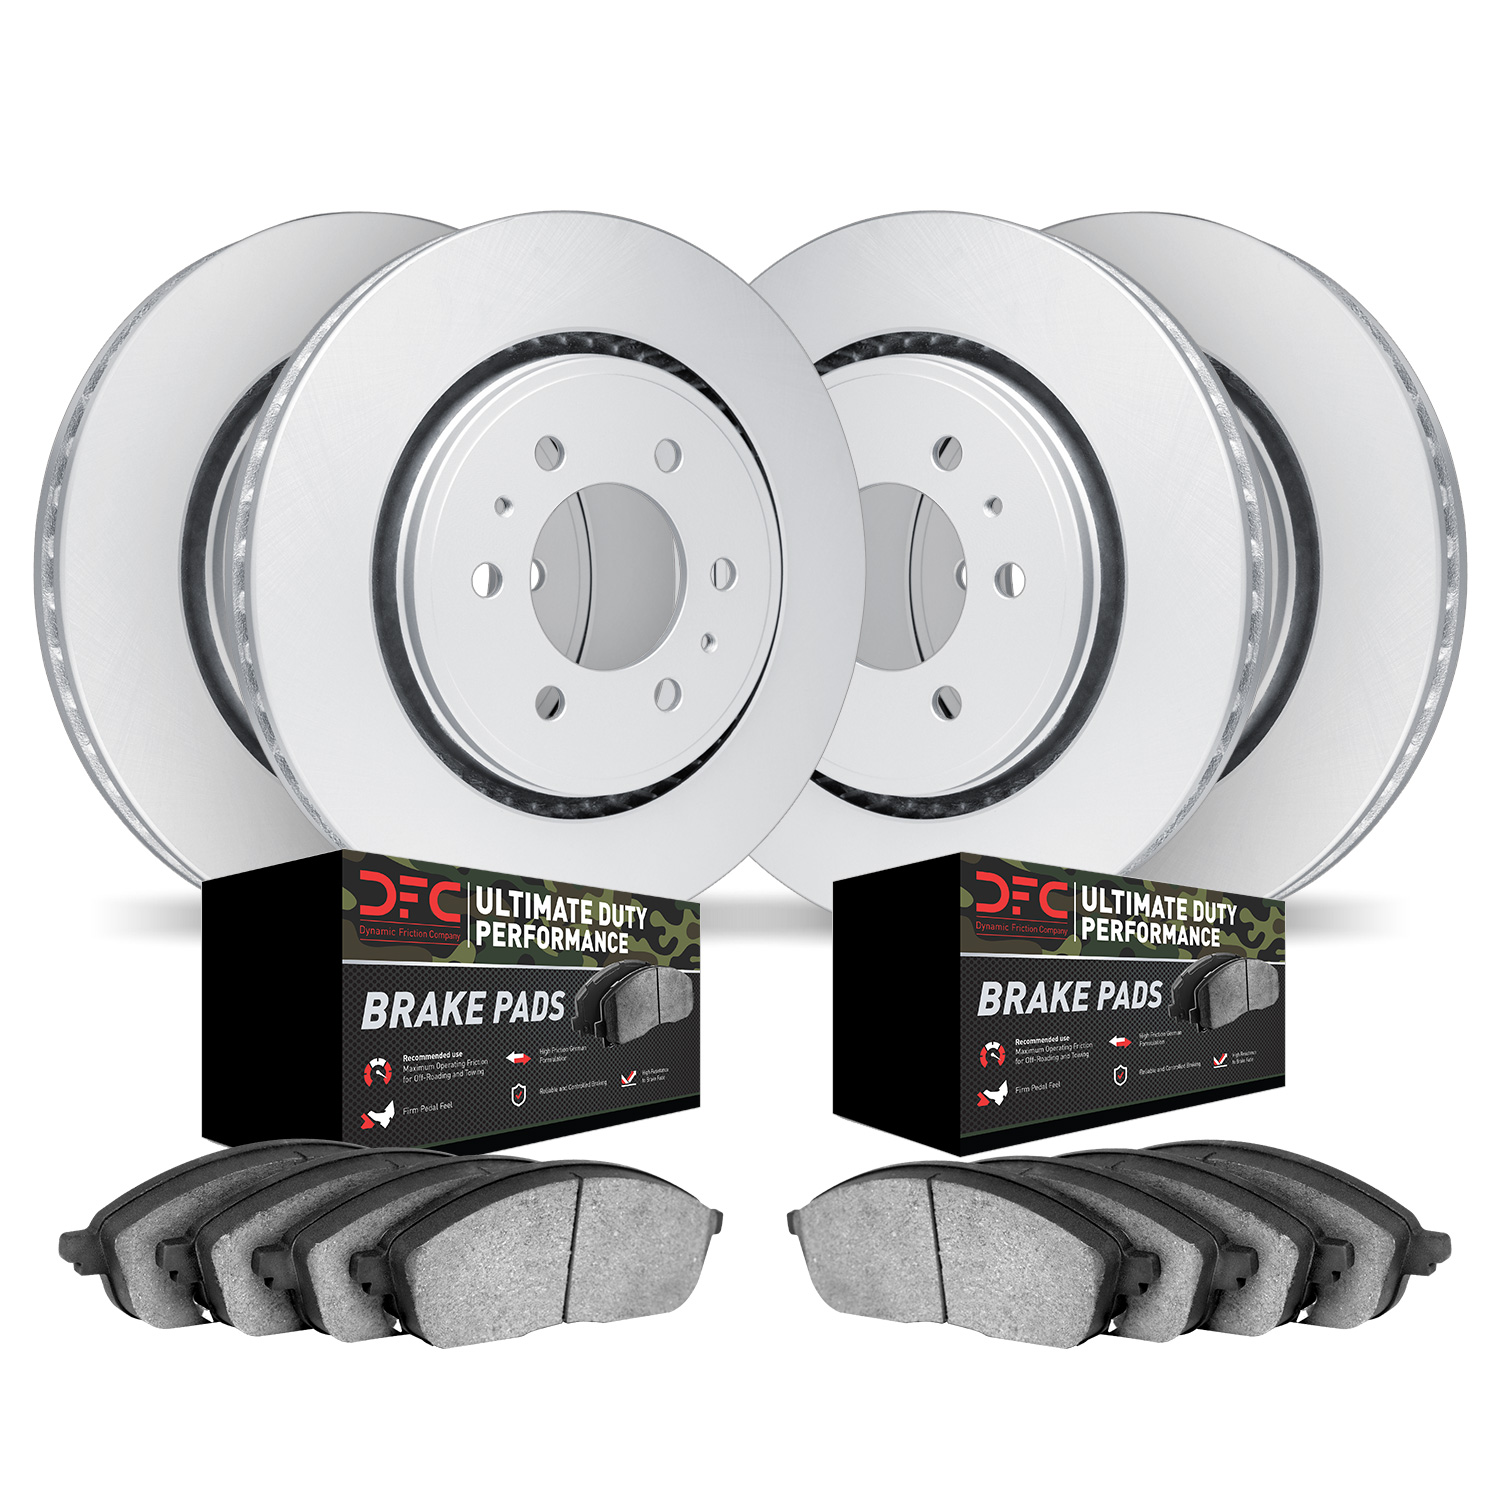 4404-76002 Geospec Brake Rotors with Ultimate-Duty Brake Pads Kit, 2001-2007 Lexus/Toyota/Scion, Position: Front and Rear